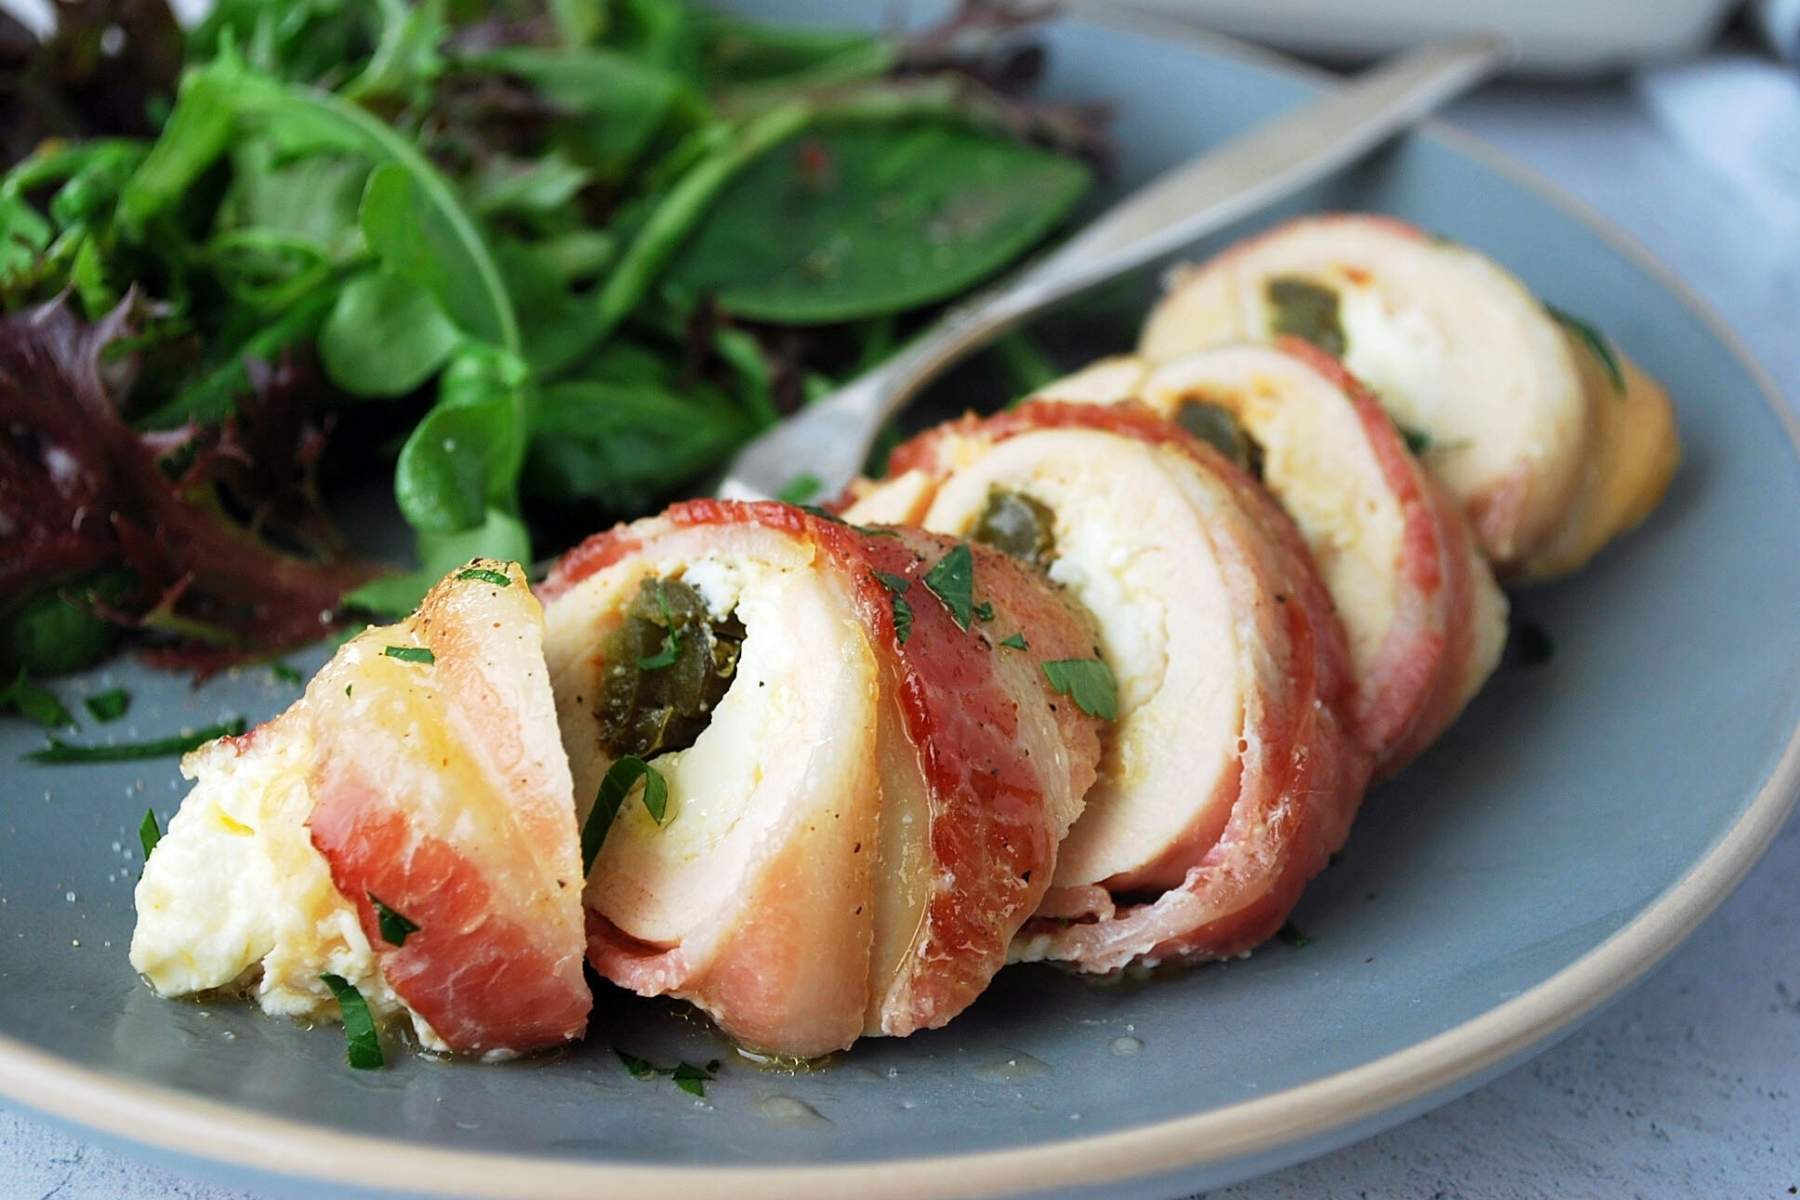 sliced stuffed chicken breast wrapped in bacon on a plate with salad and a fork